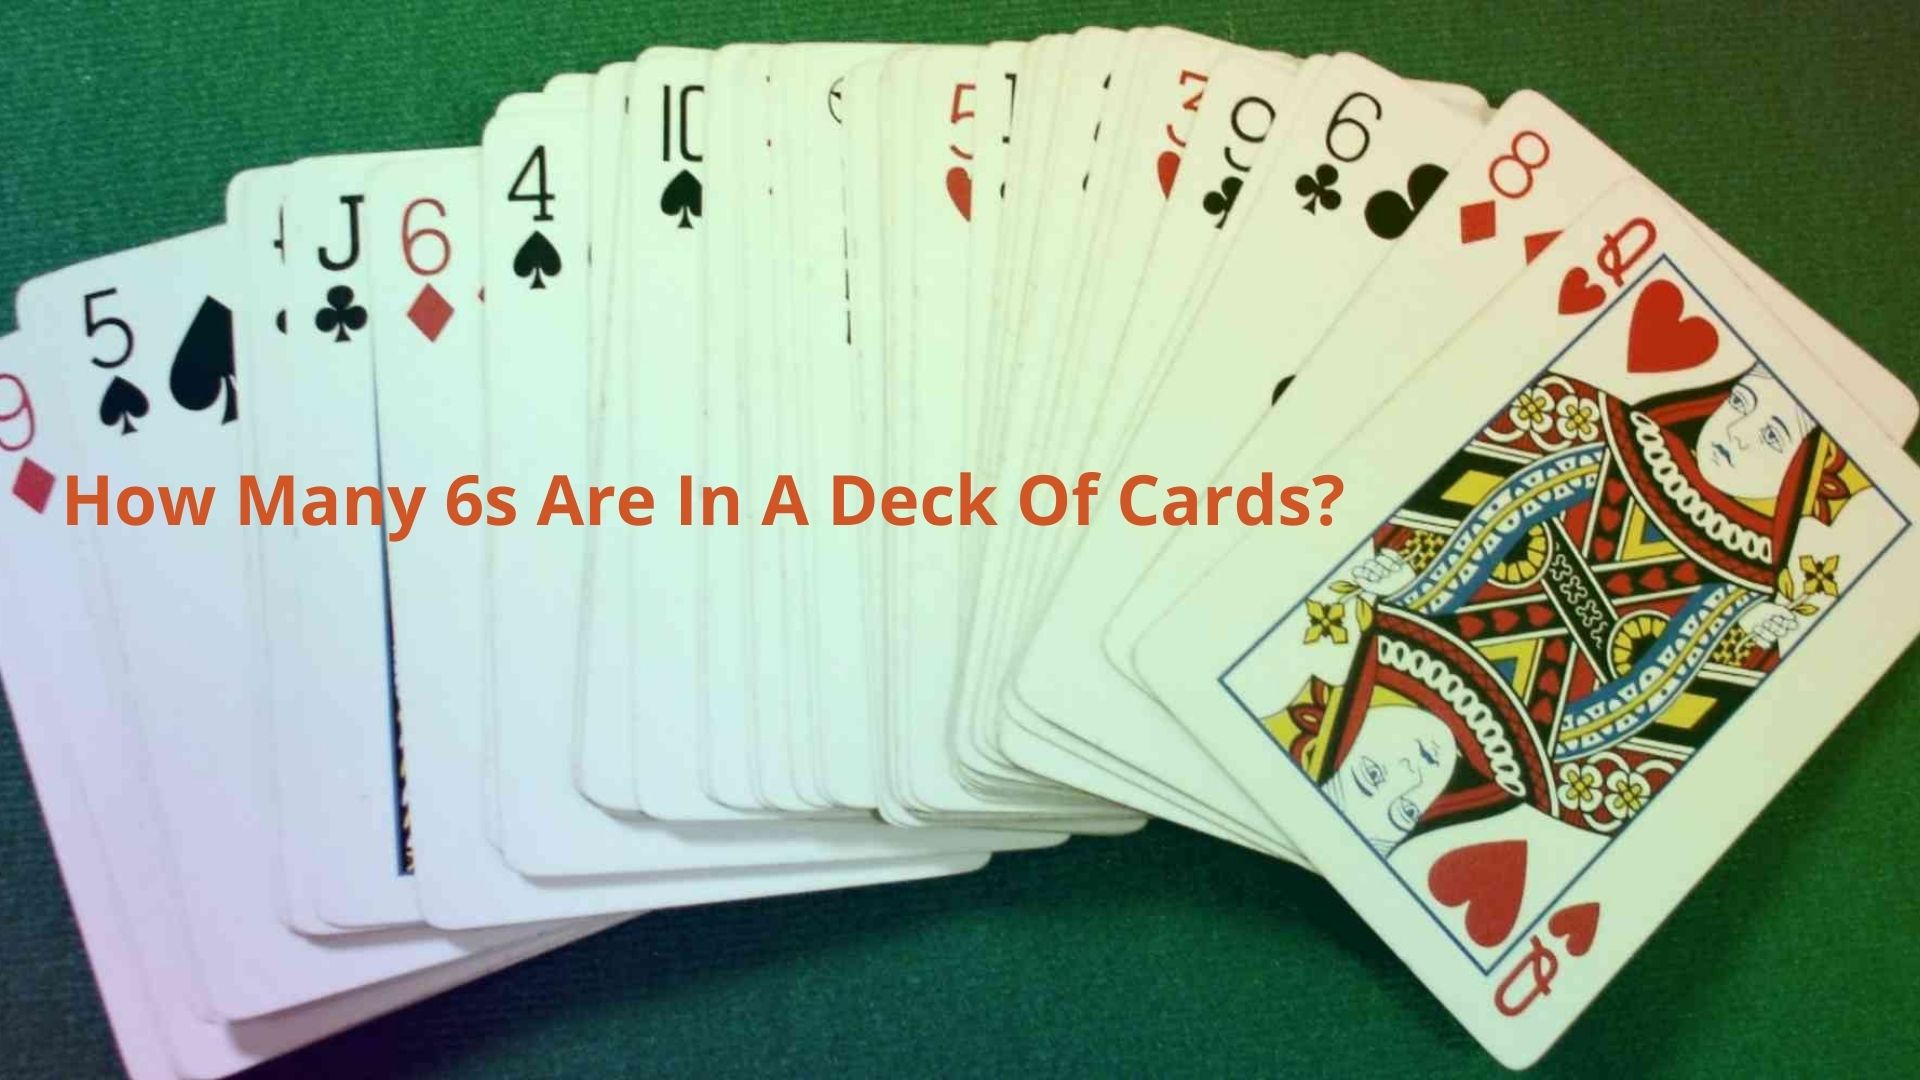 How Many 6s Are In A Deck Of Cards